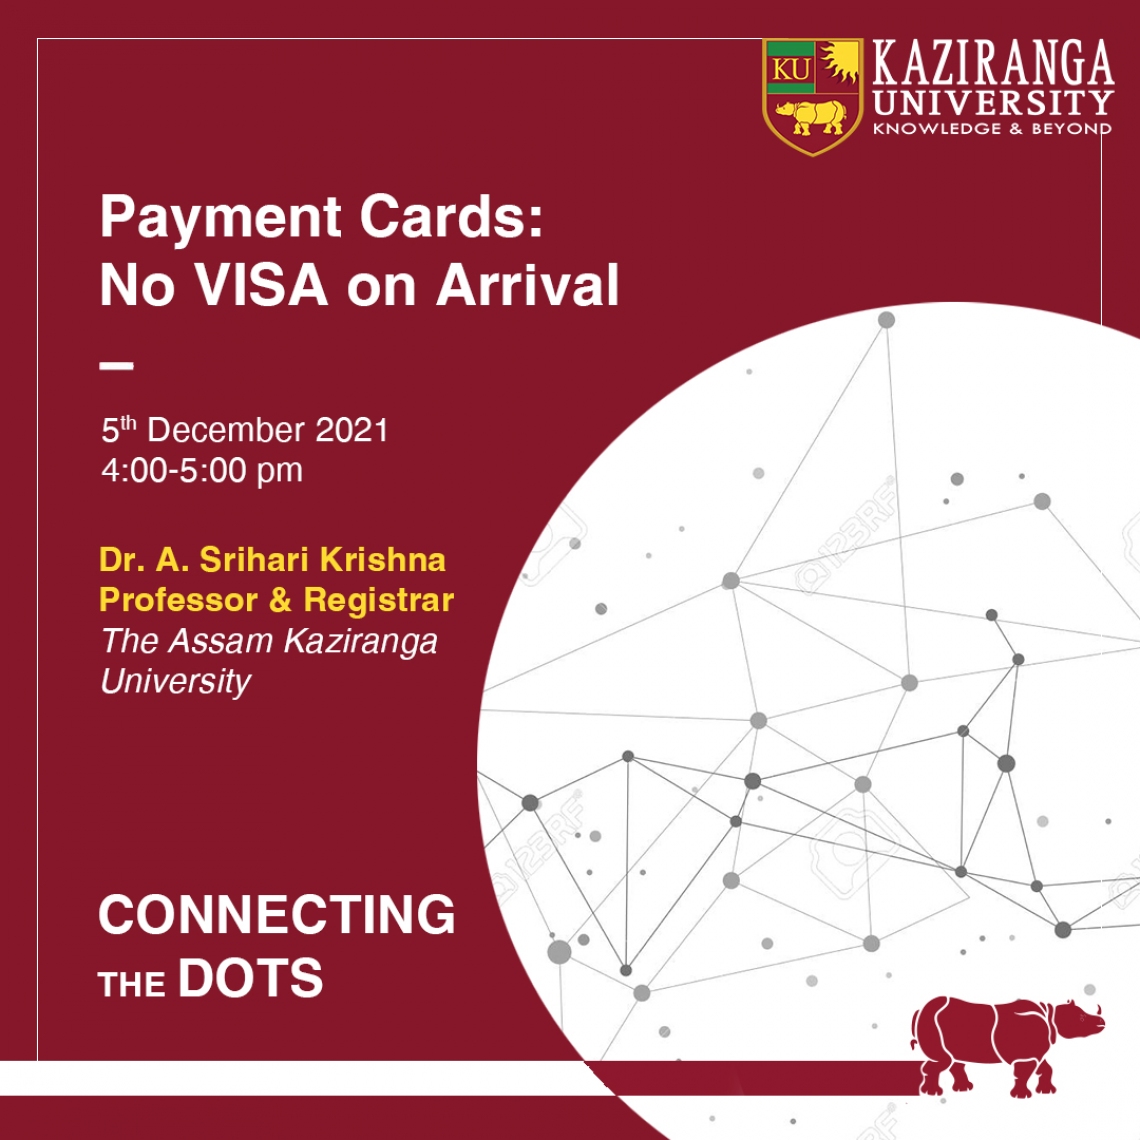 Connecting the Dots weekend Webinar on Payment Cards: No VISA On Arrival